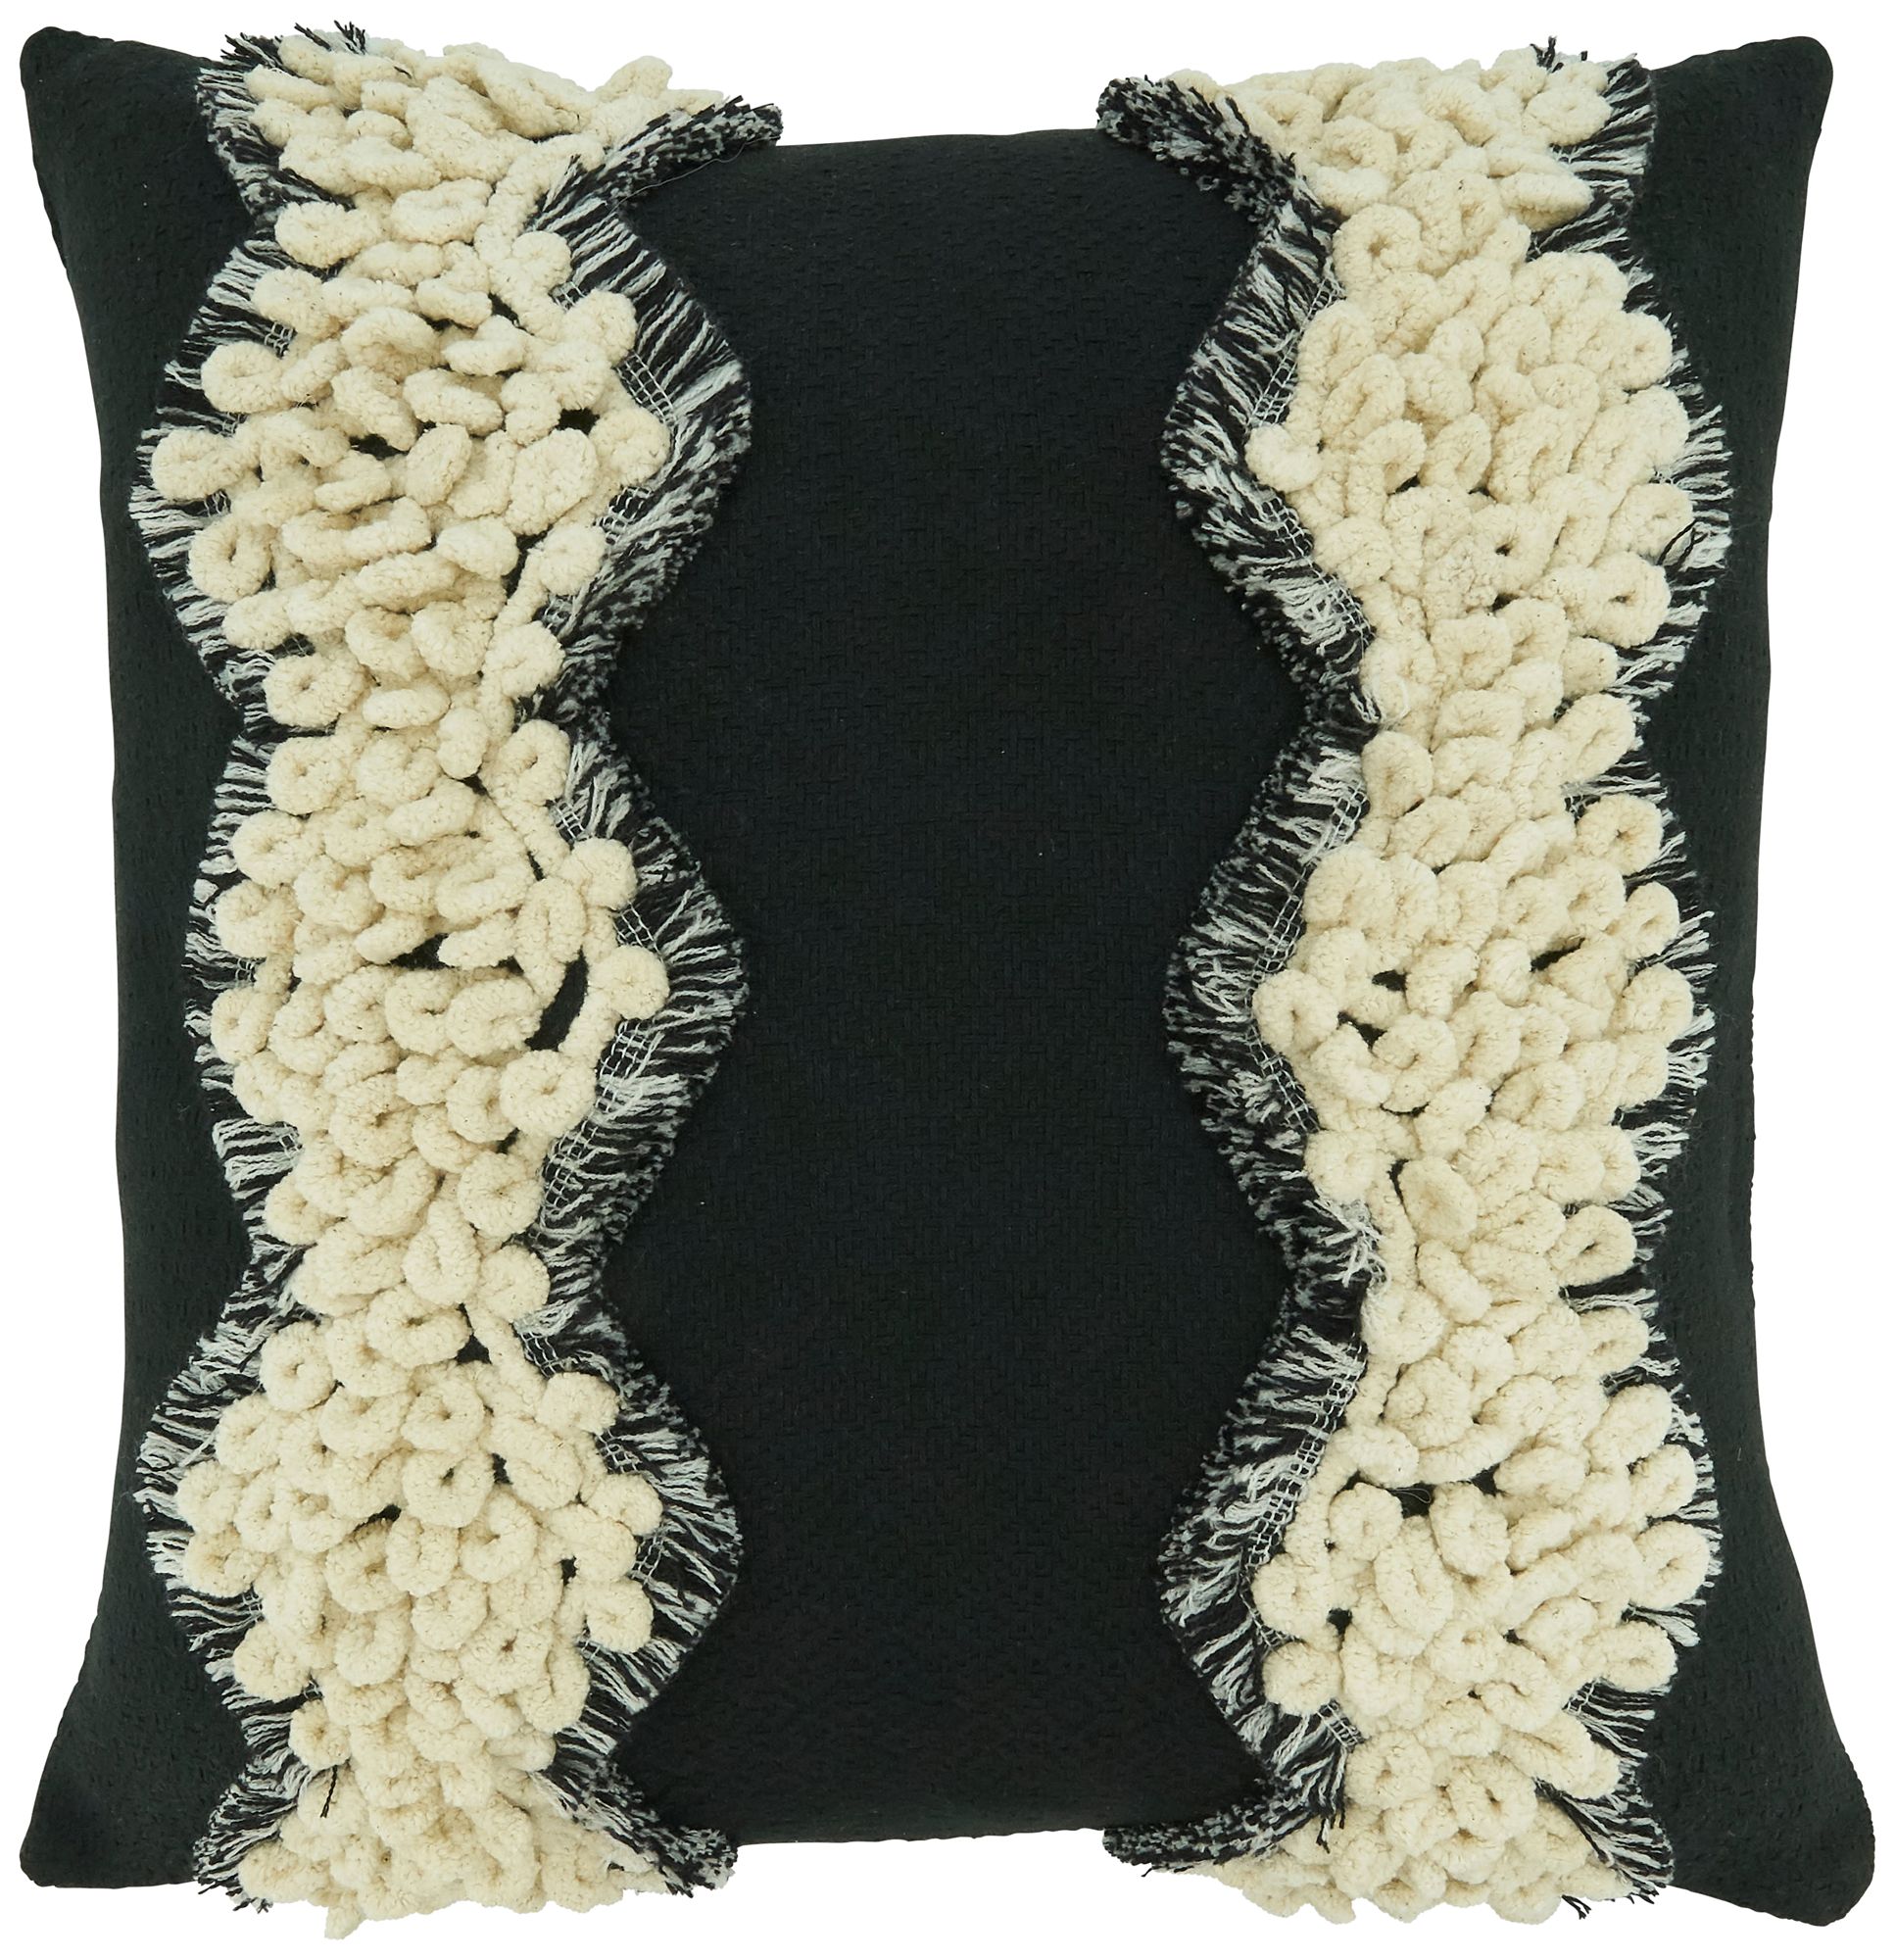 Evelyn Black White Yarn Lace 18" Square Throw Pillow